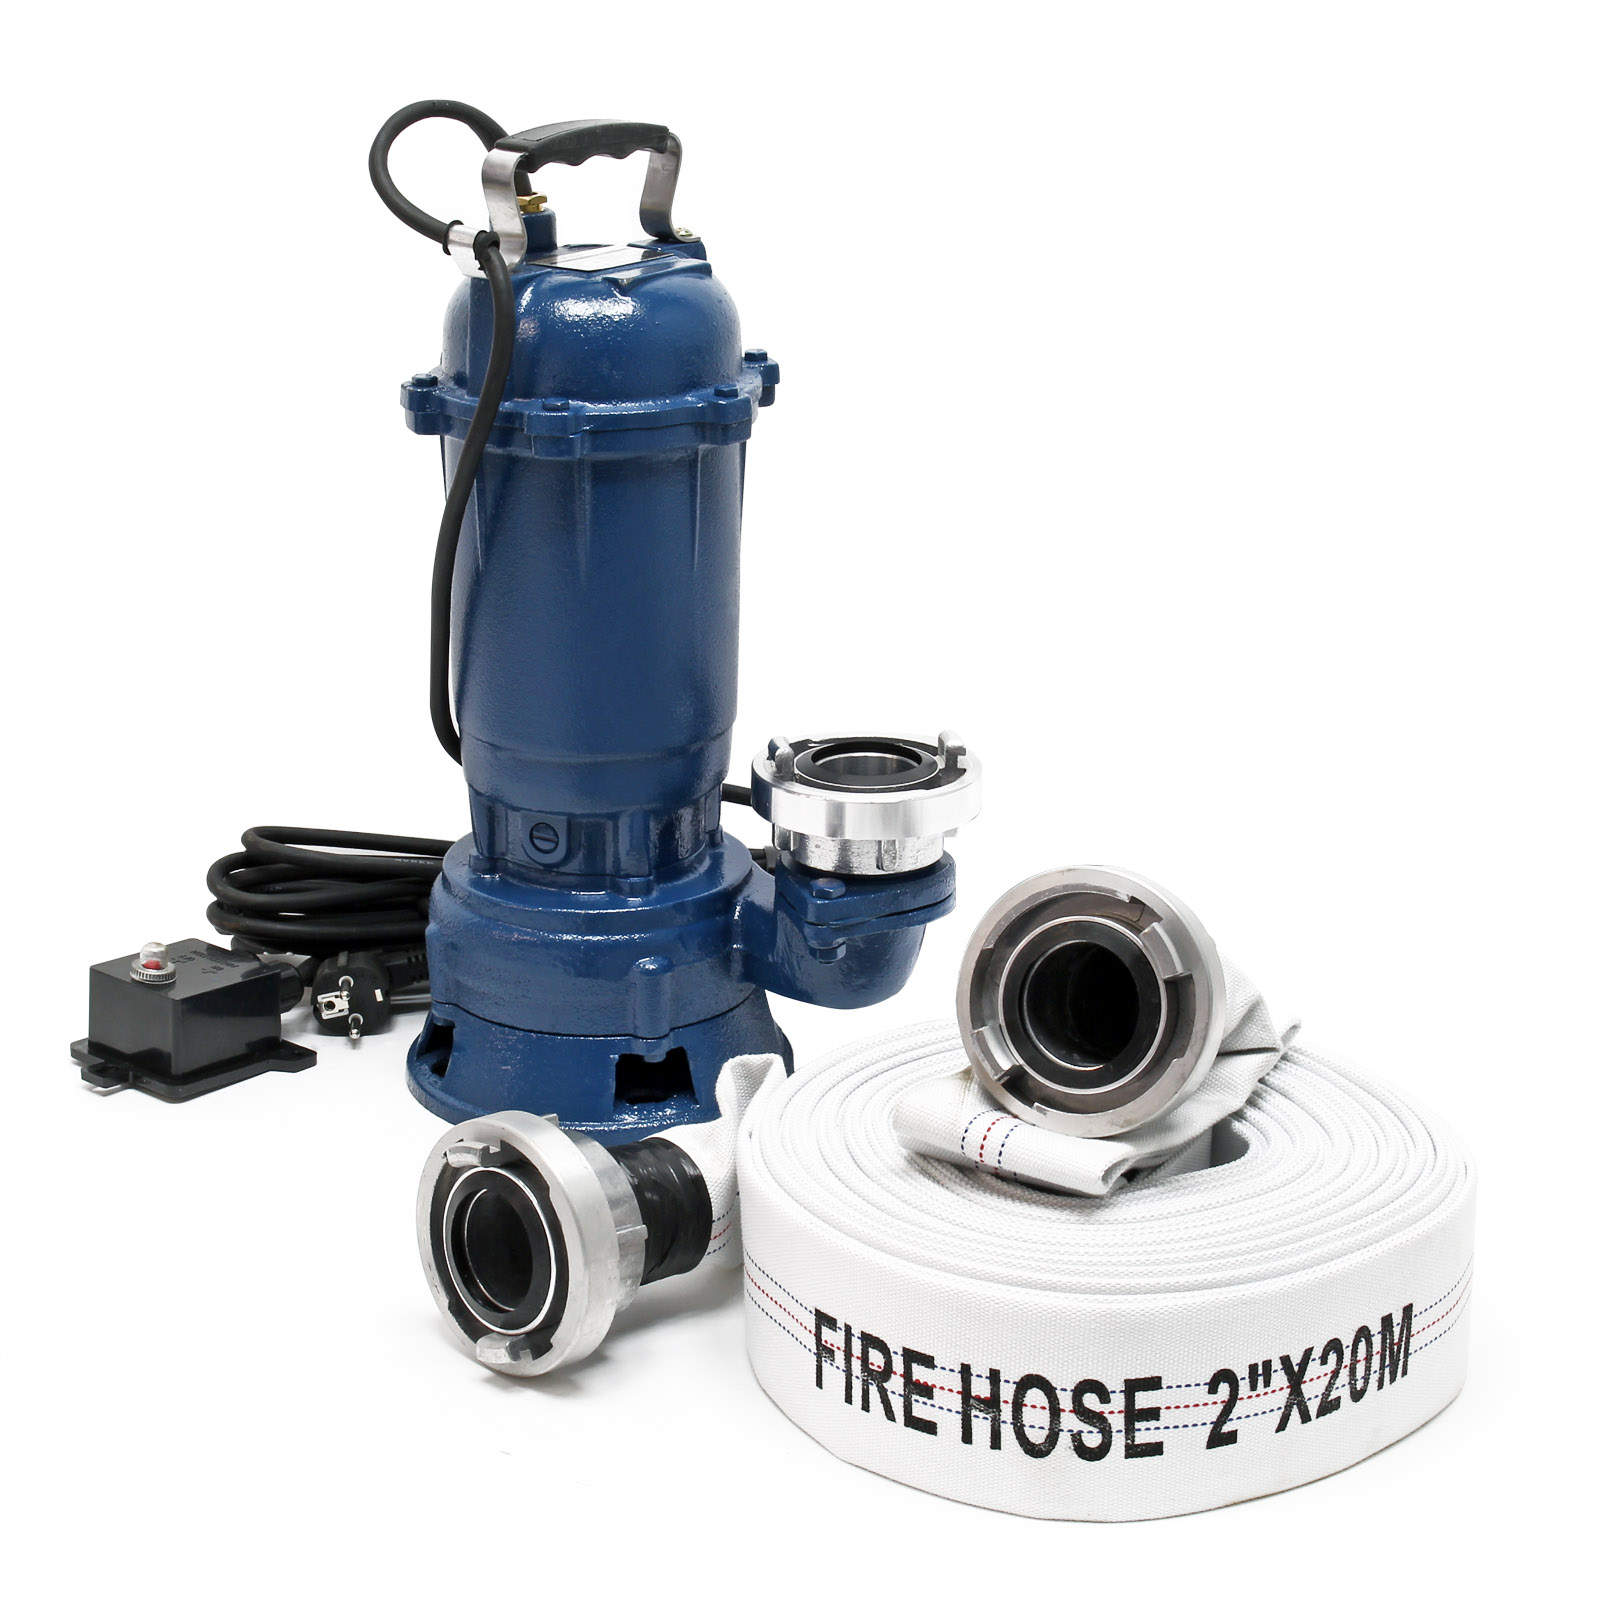 Waste Water Pump 1100W 15,000l/h with 20m Hose Submersible Pump